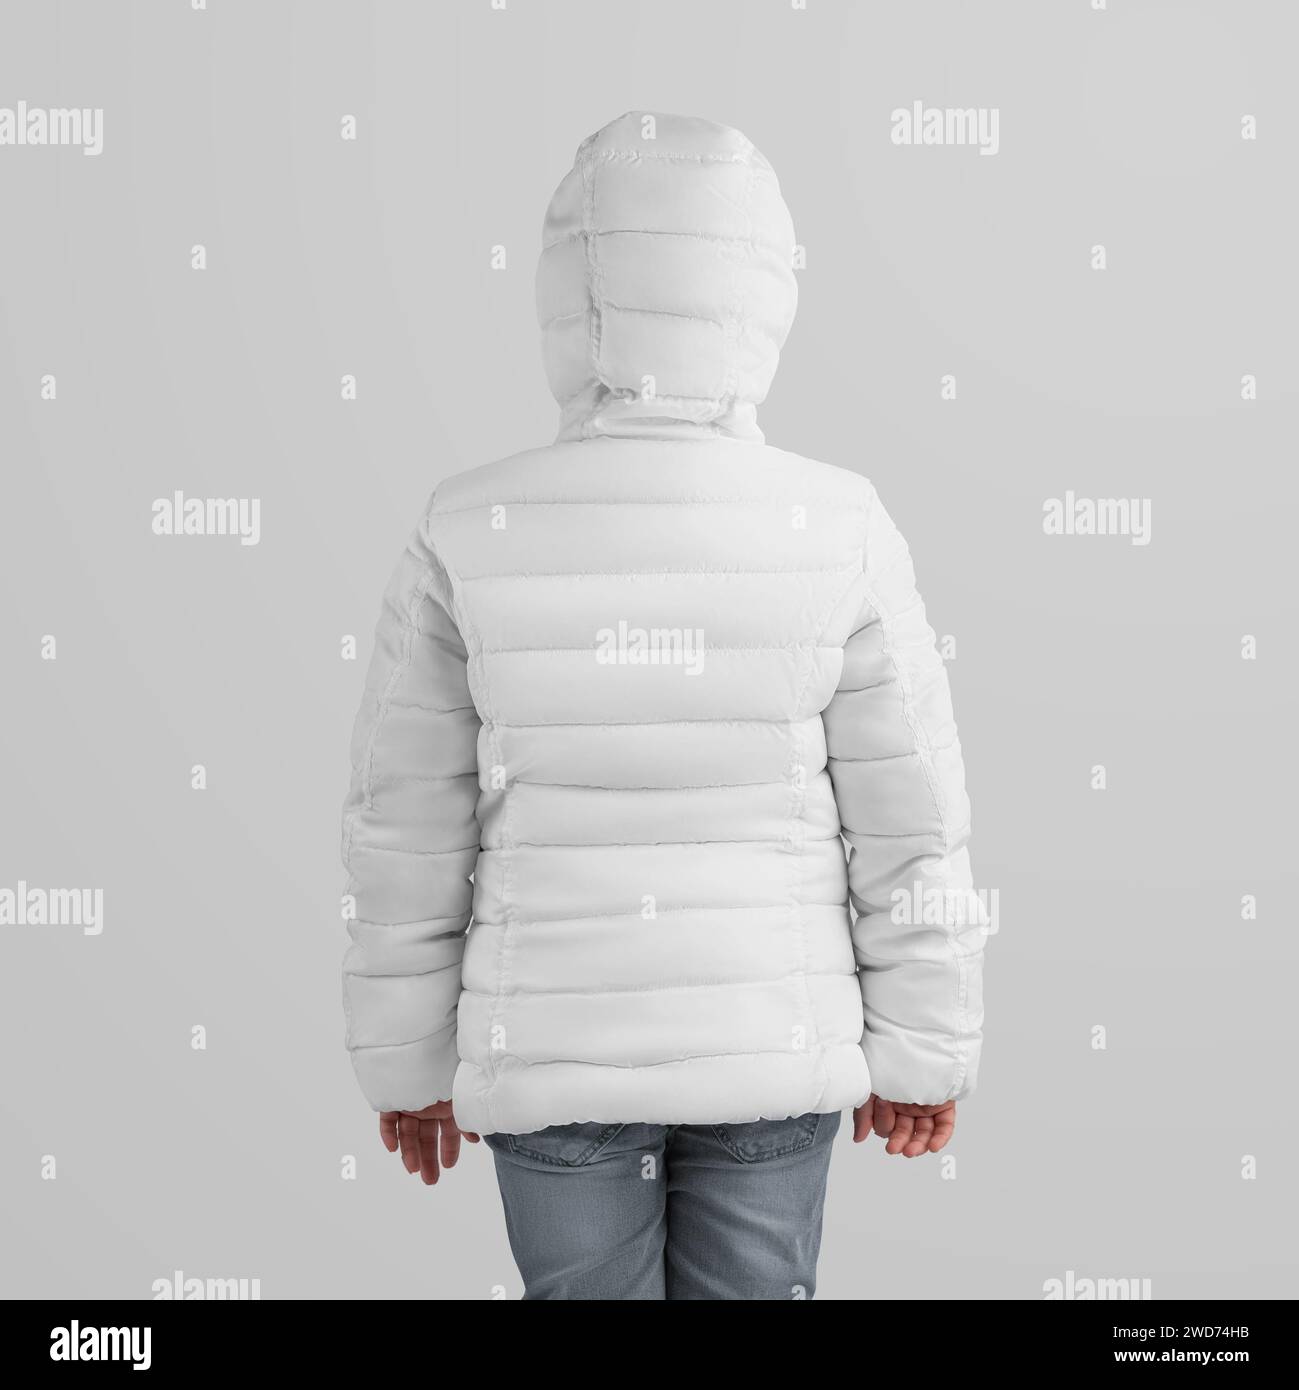 Winter warm jacket template on a girl in a hood, rear view, isolated on a background. Mockup of stylish outerwear for design, branding, commerce. Kids Stock Photo